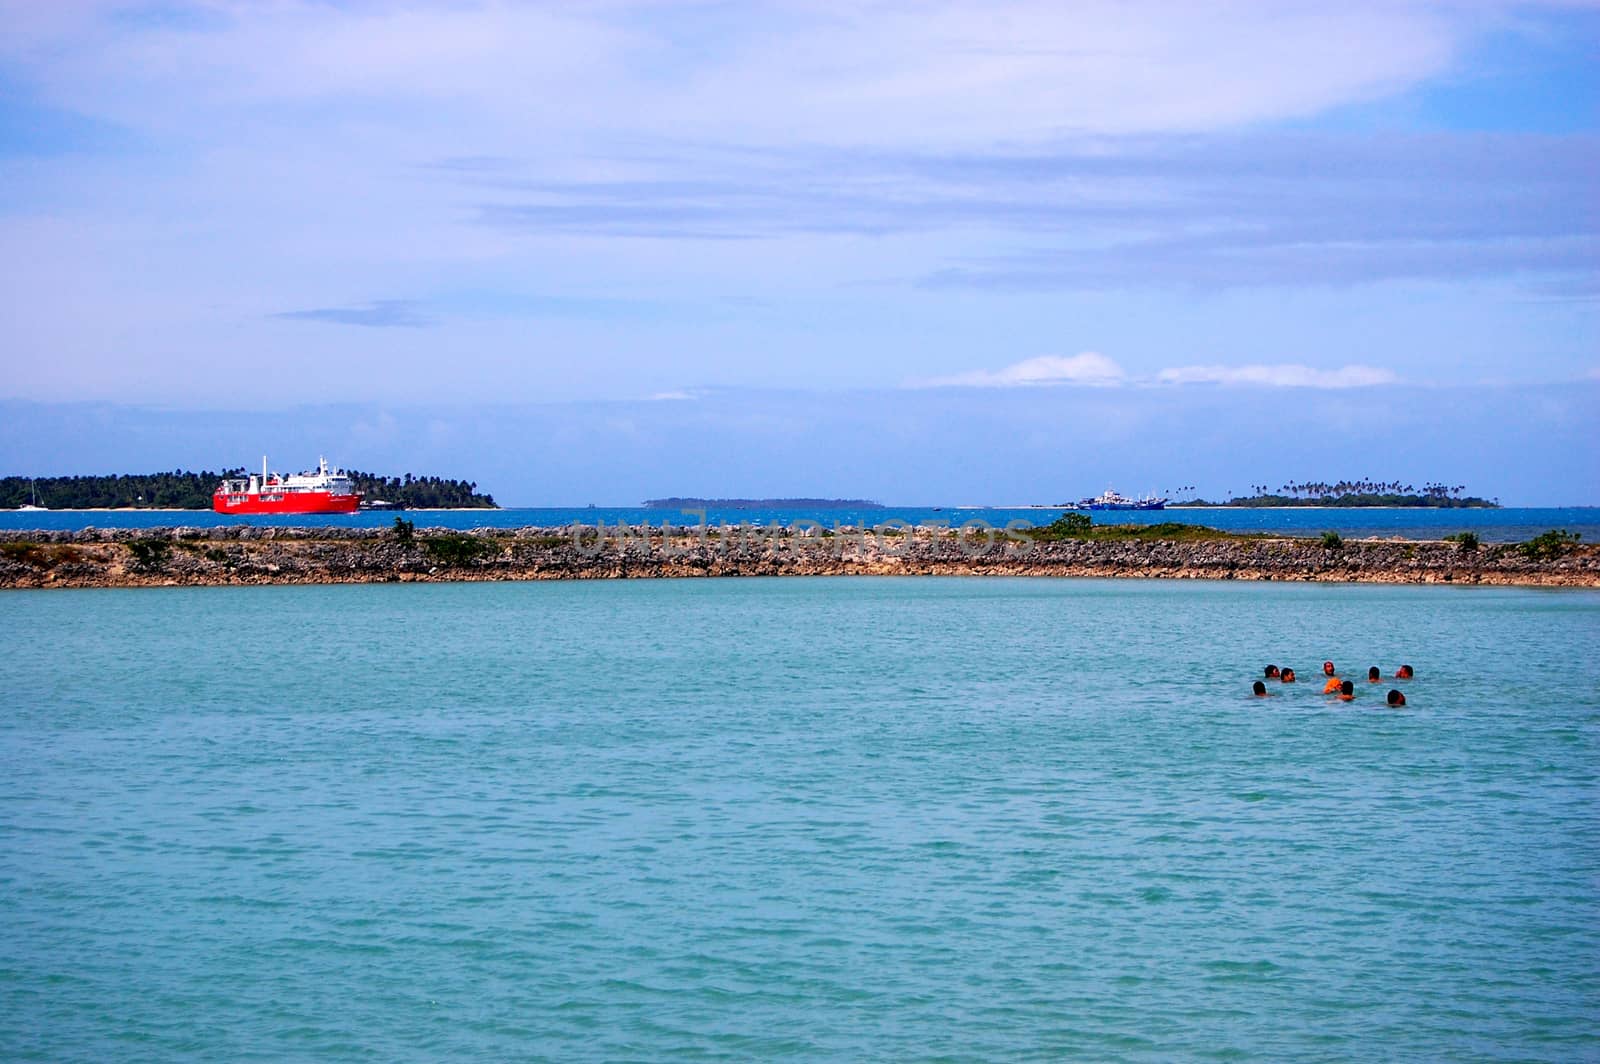 People swimming near port, Tonga, South Pacific